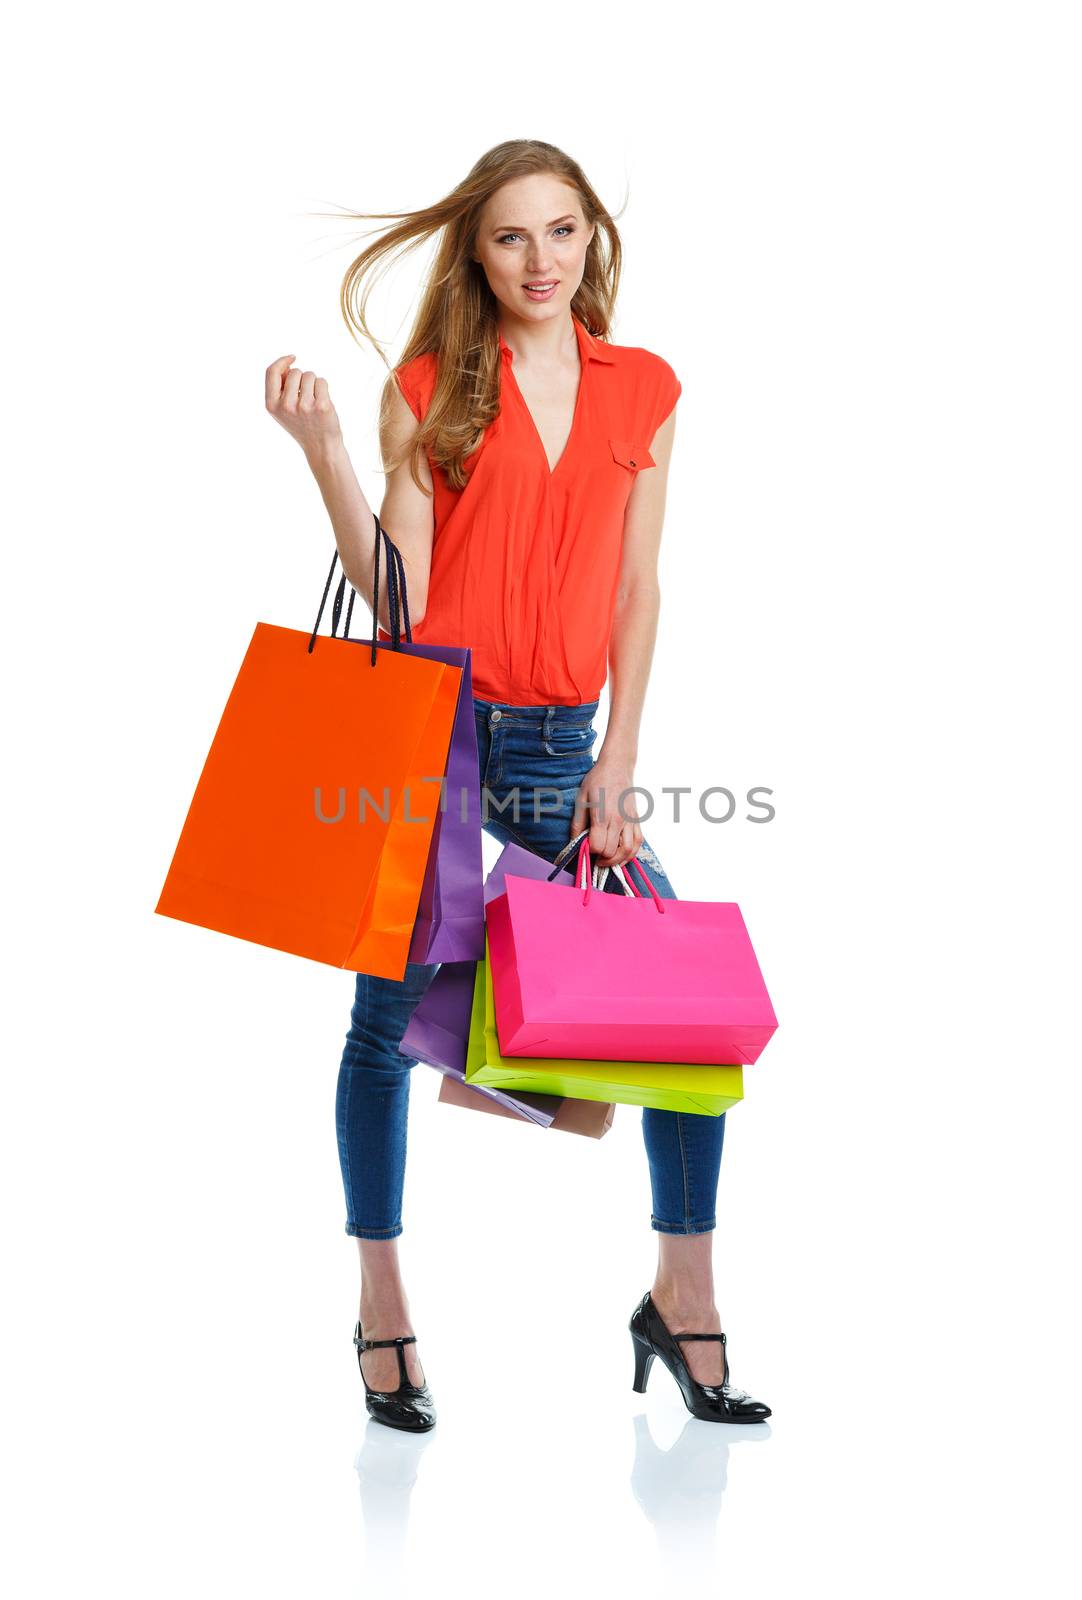 Happy lovely woman with shopping bags over white background